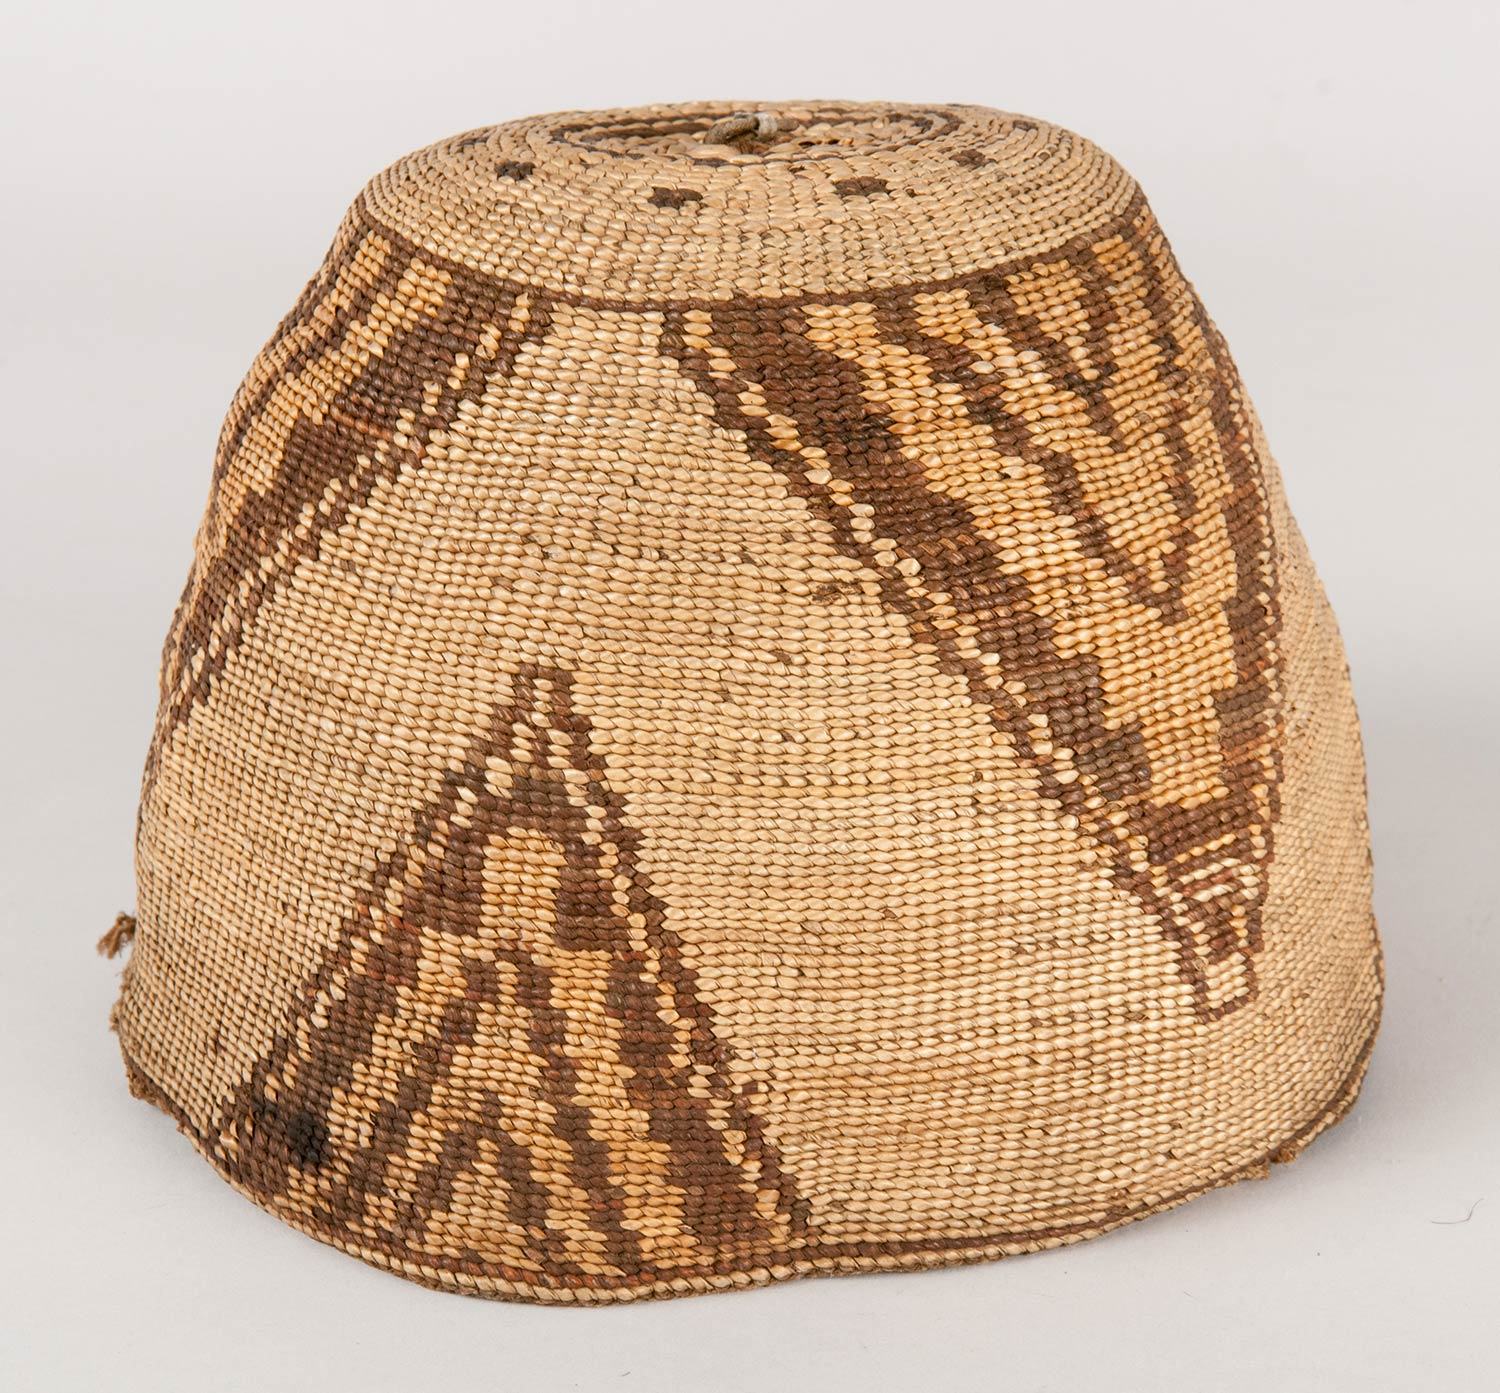 Subconical shaped basket hat made from hemp, beargrass, cedar root bark strips, and wool. Piece of cured hide located at top of hat, which was used to start the crown base.